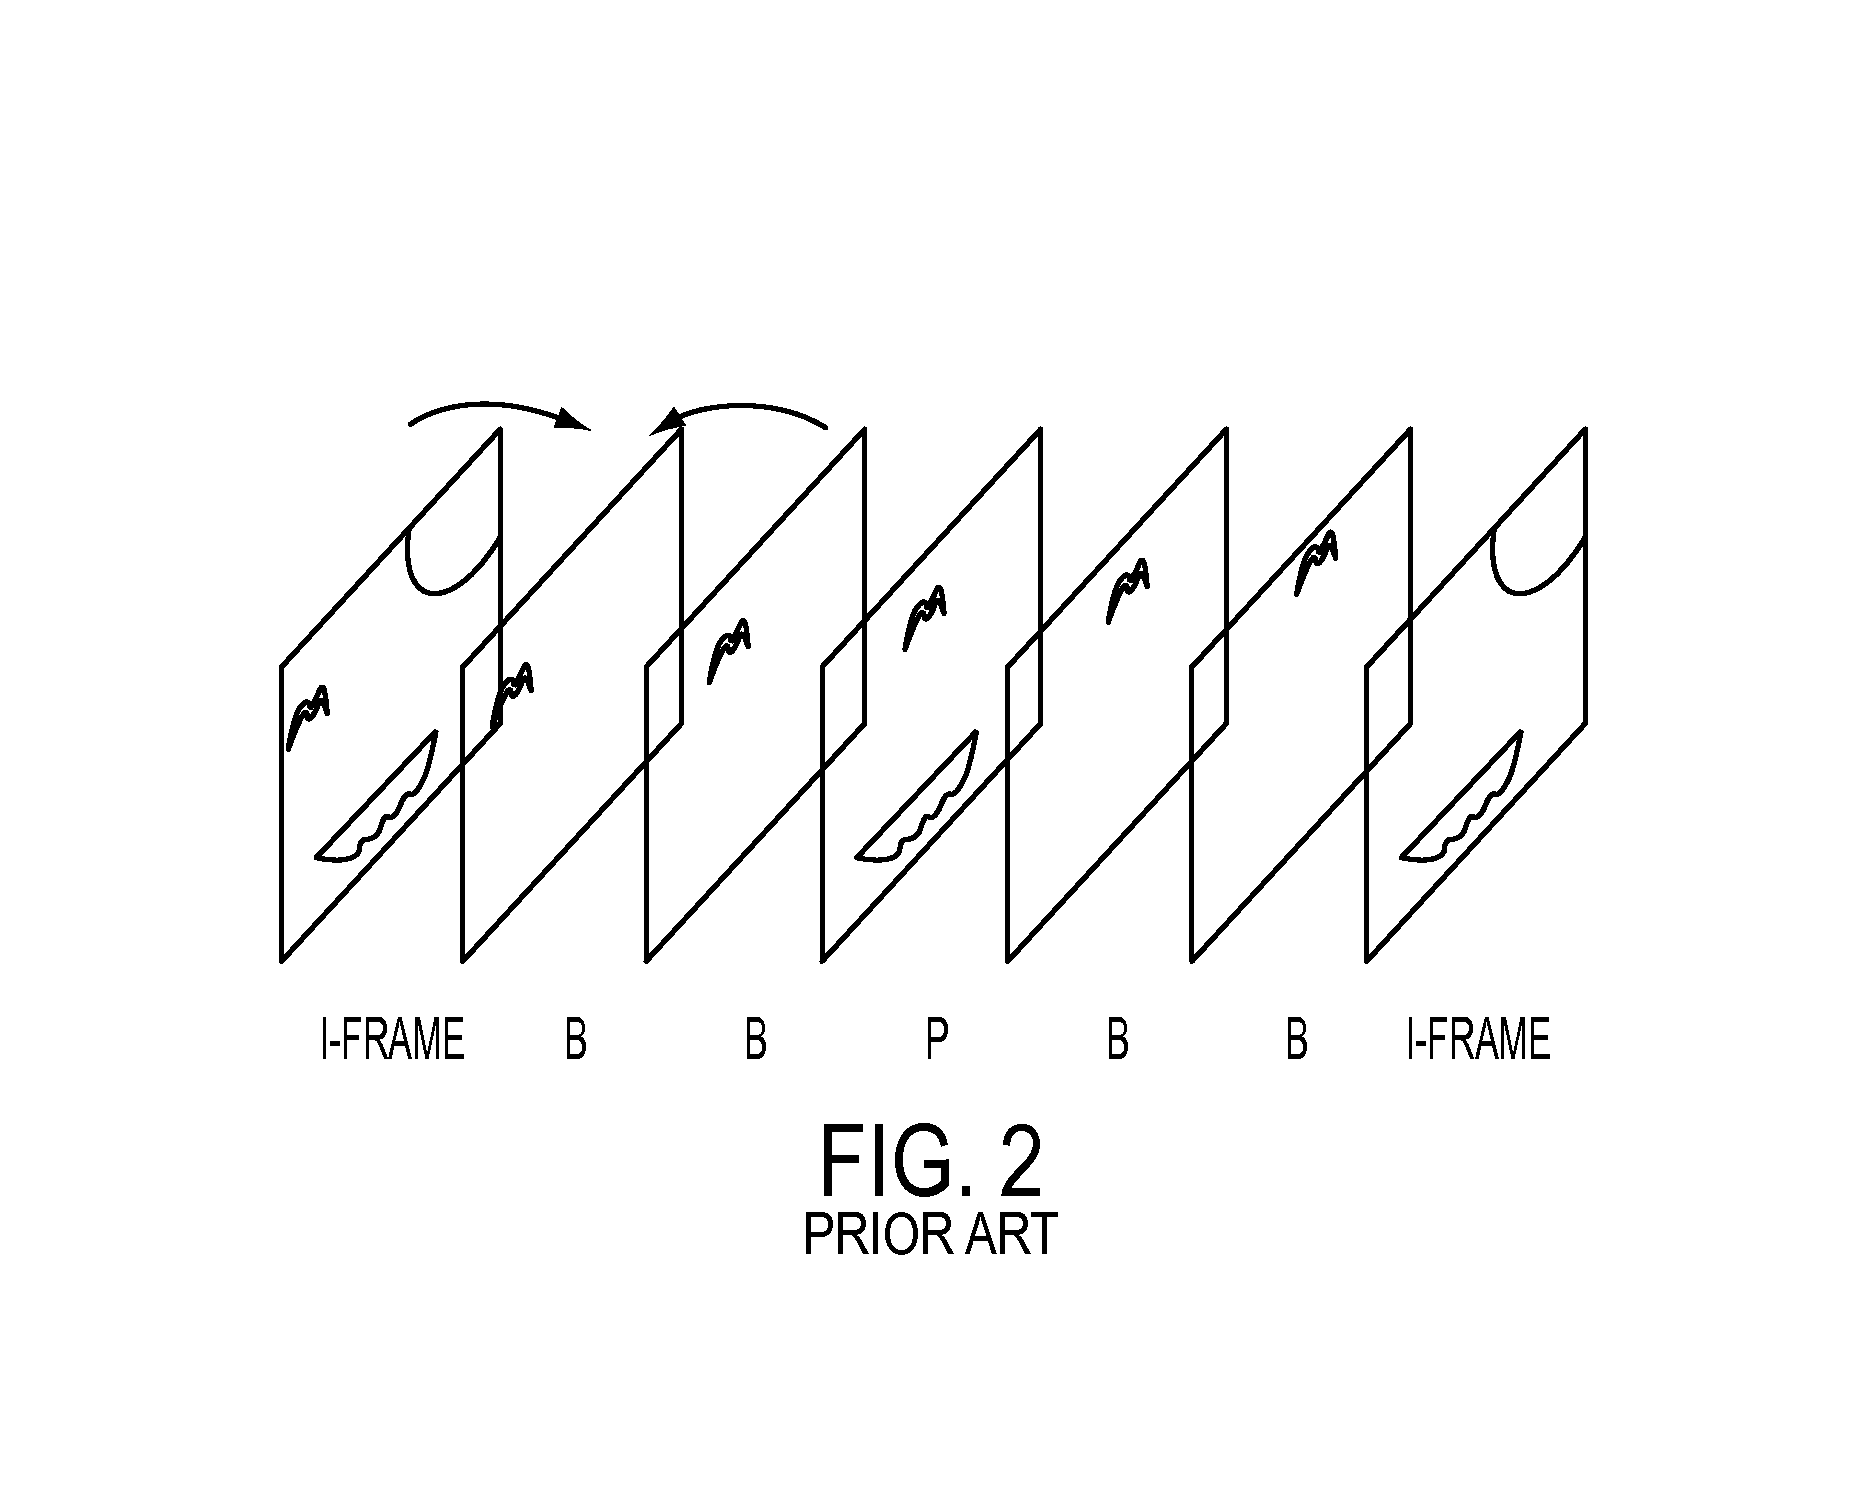 System and method for achieving computationally efficient motion estimation in video compression based on motion direction and magnitude prediction